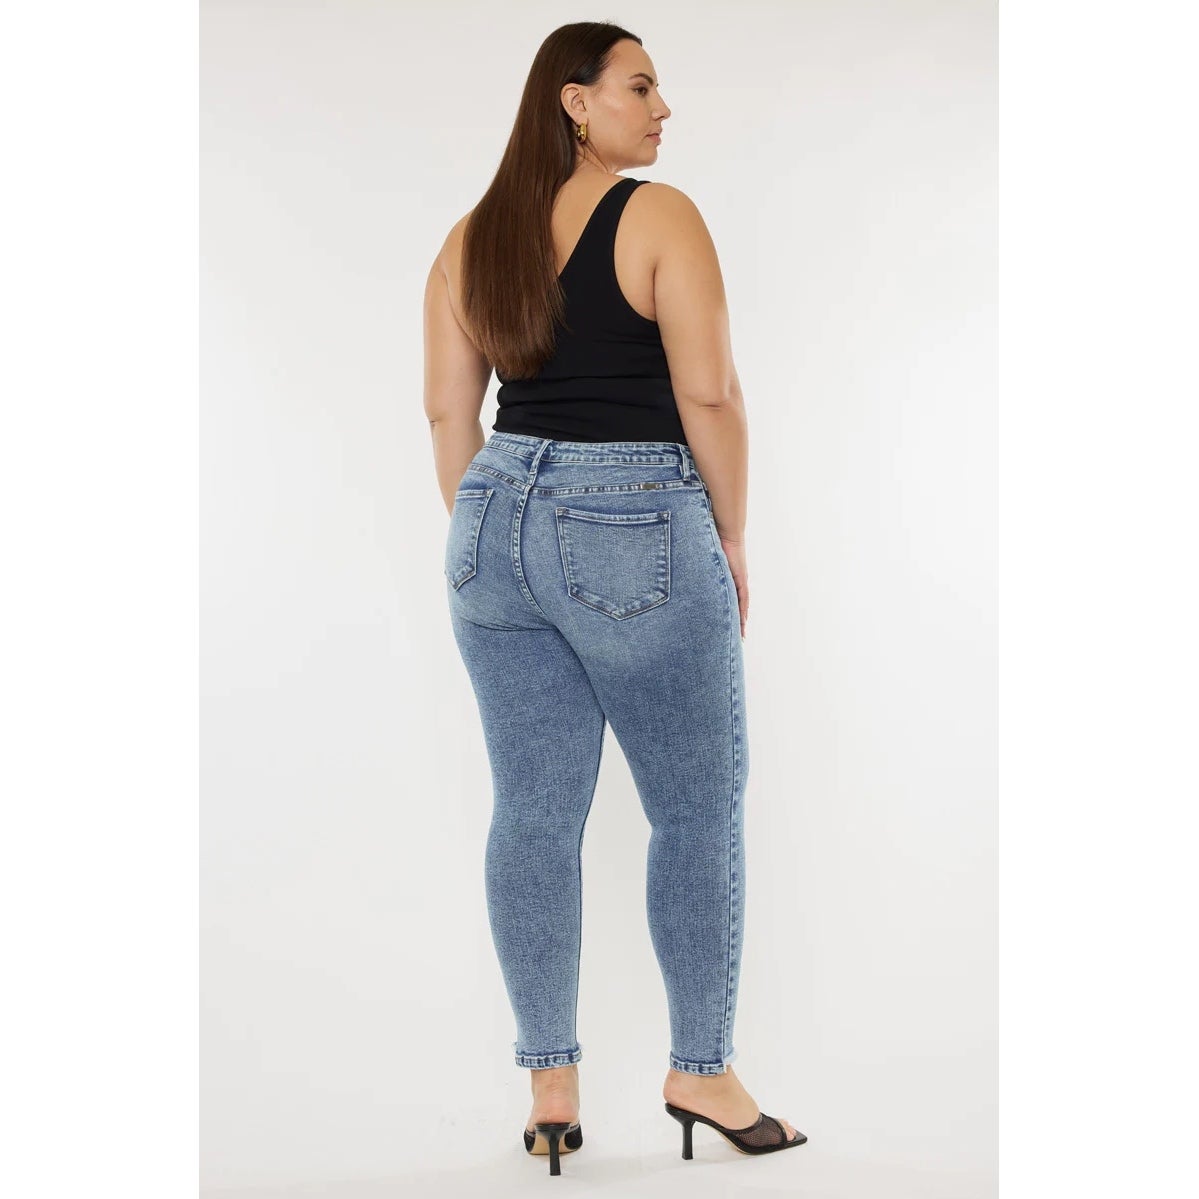 High Waisted Skinny Jeans With Rubber Band Corset For Women Casual Denim  Plus Size Trousers Women From Cqh03, $41.01